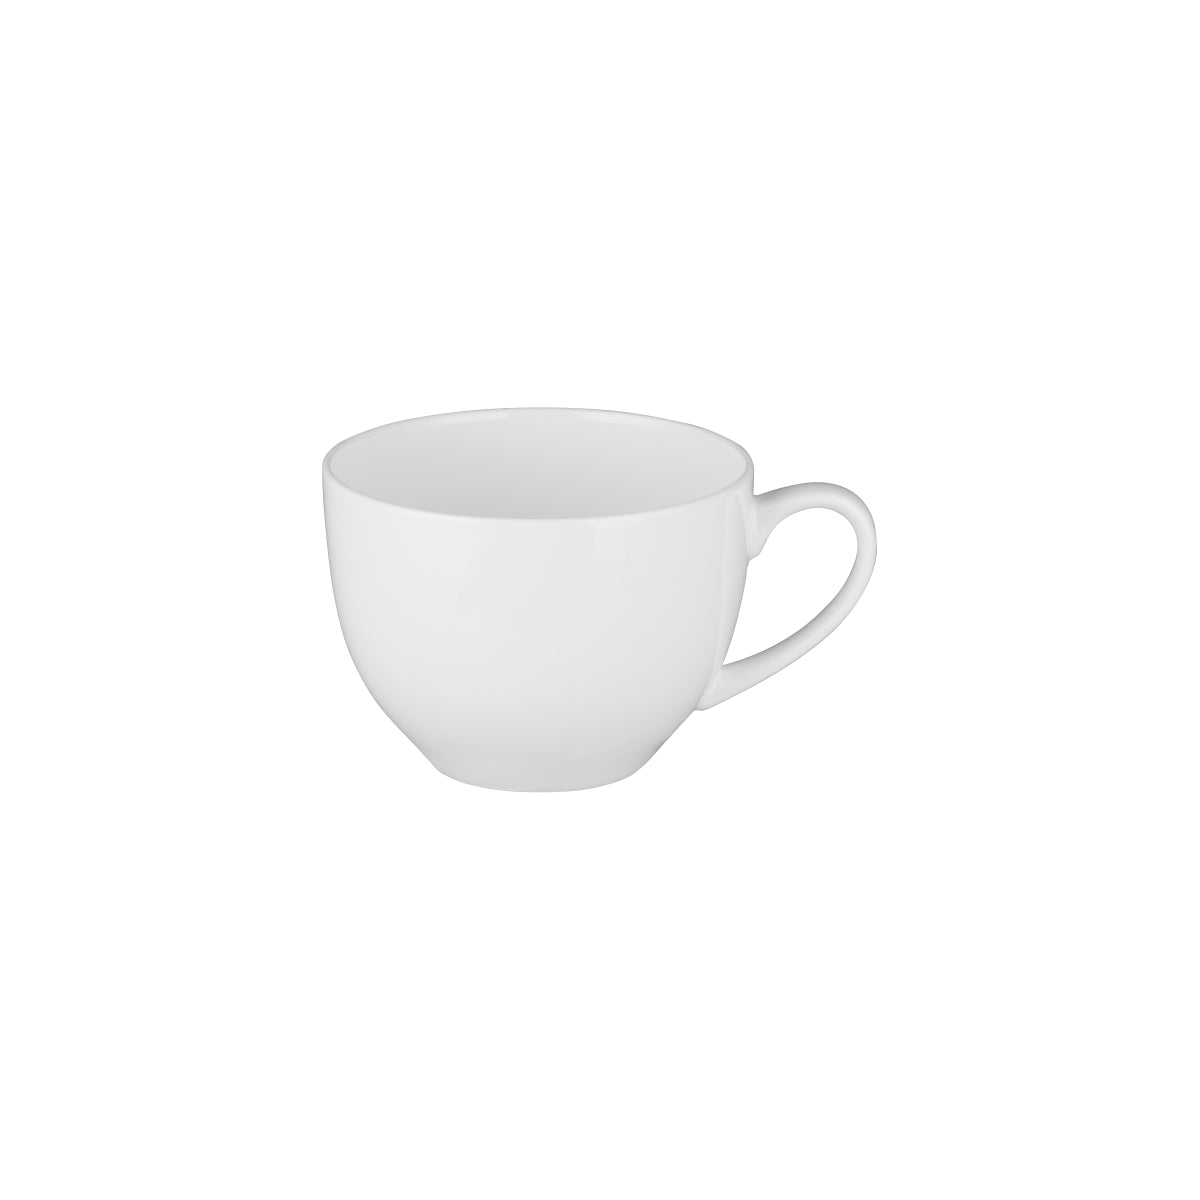 Tea Cup - 230Ml, Pacific Bone China: Pack of 36